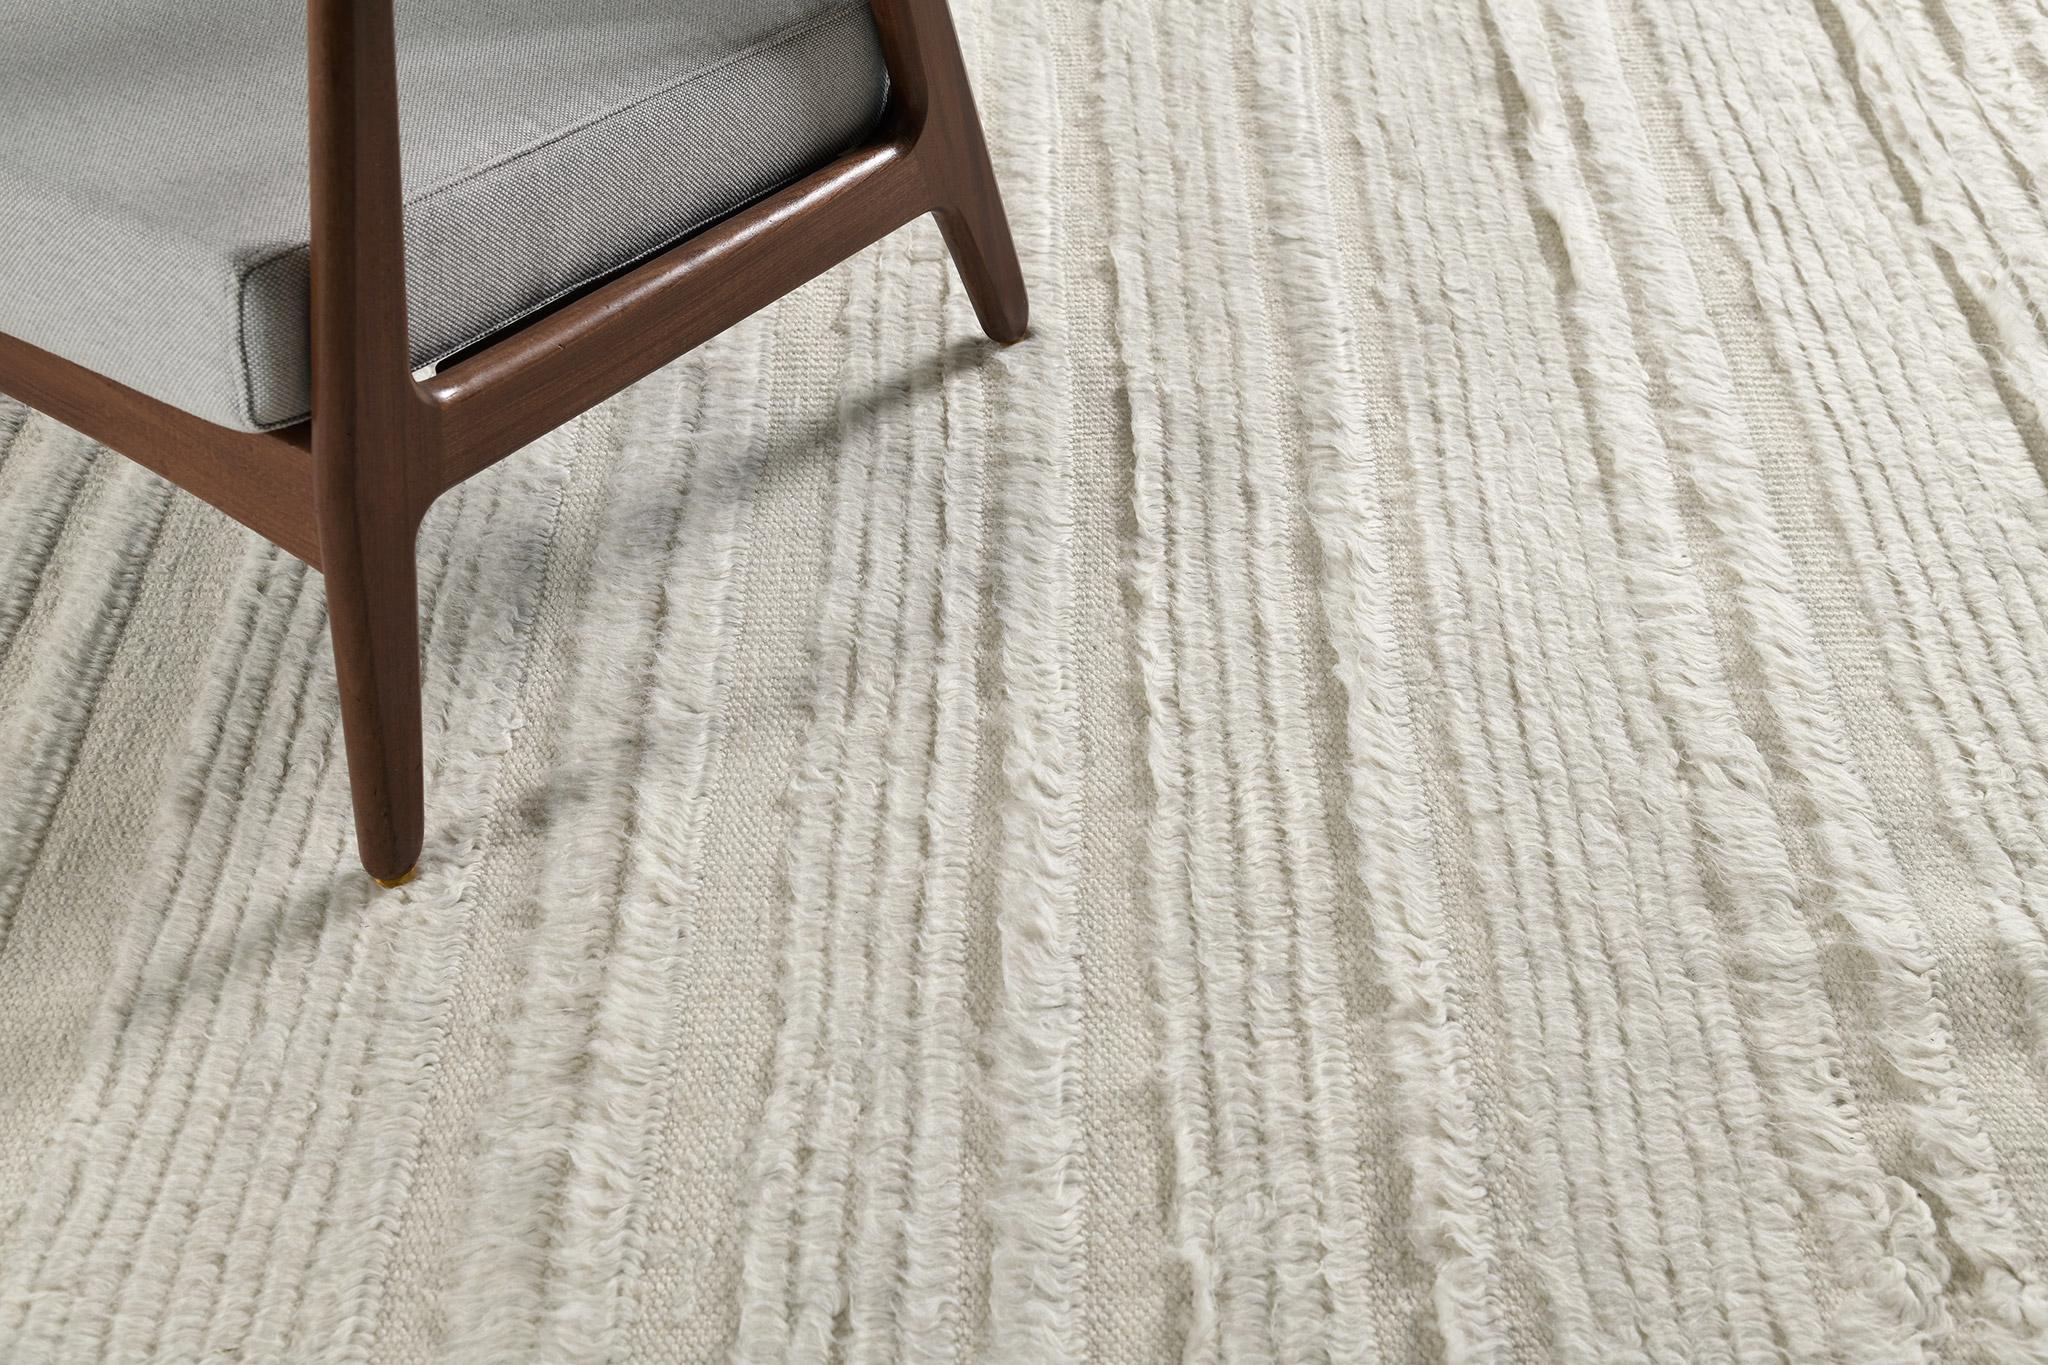 Kit Moresby II is luxurious wool that features embossed varying degrees of lines. Perfect decor for any home space because of its simplicity and modern-day interpretation. Mehraban's Atlas Collection is known for its intuitive motifs, saturated